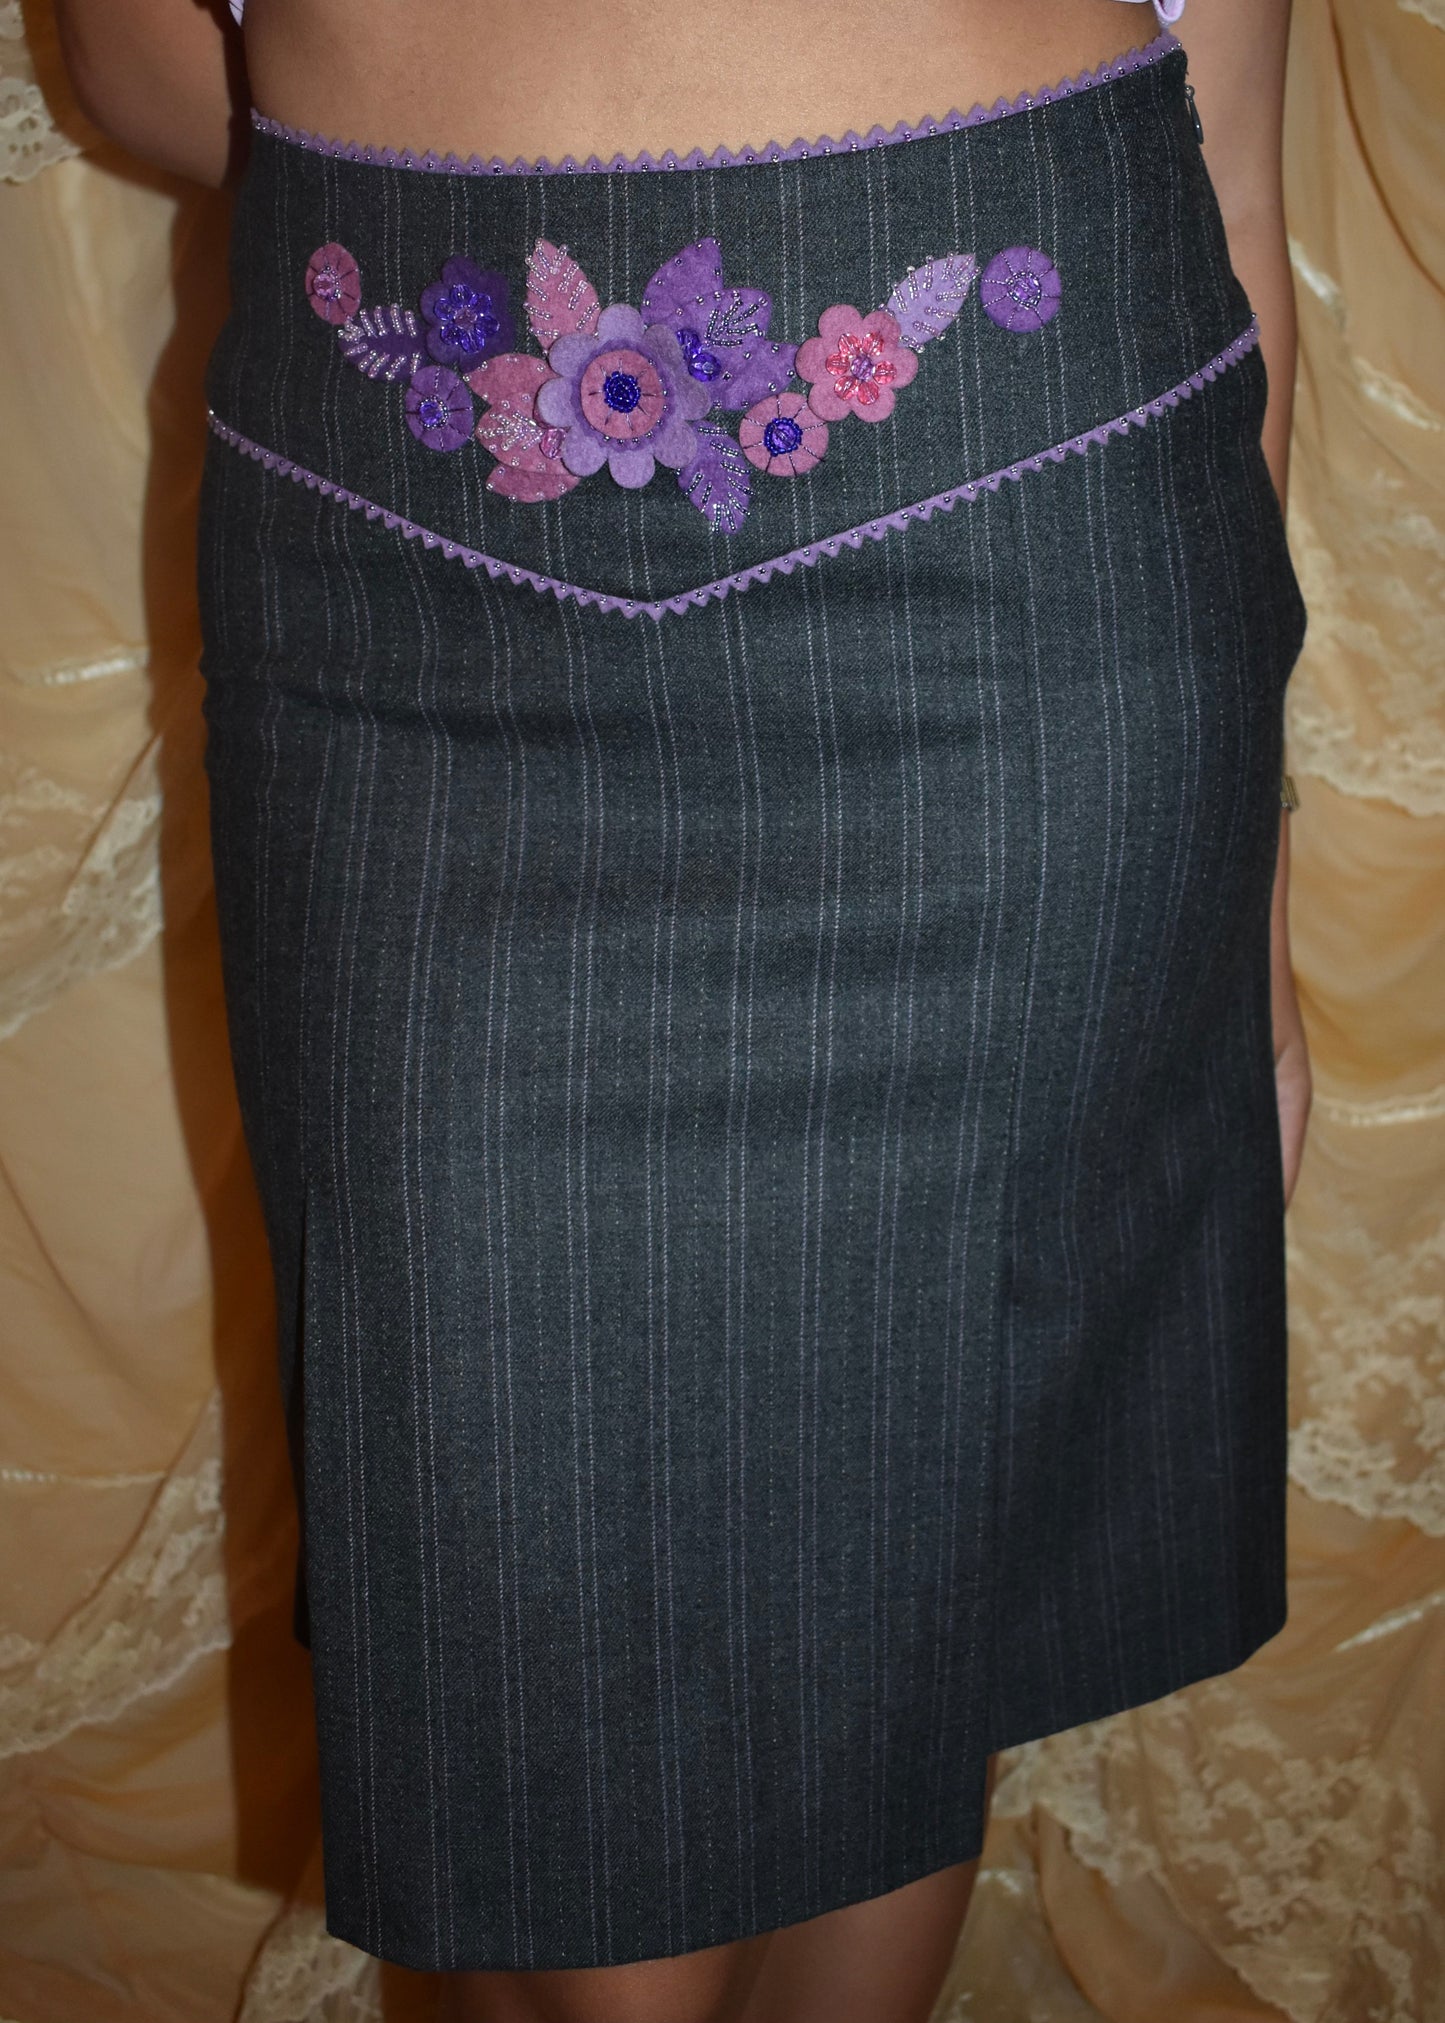 Moschino Cheap + Chic Gray Pinstripe Skirt with Beaded Floral Embellishments